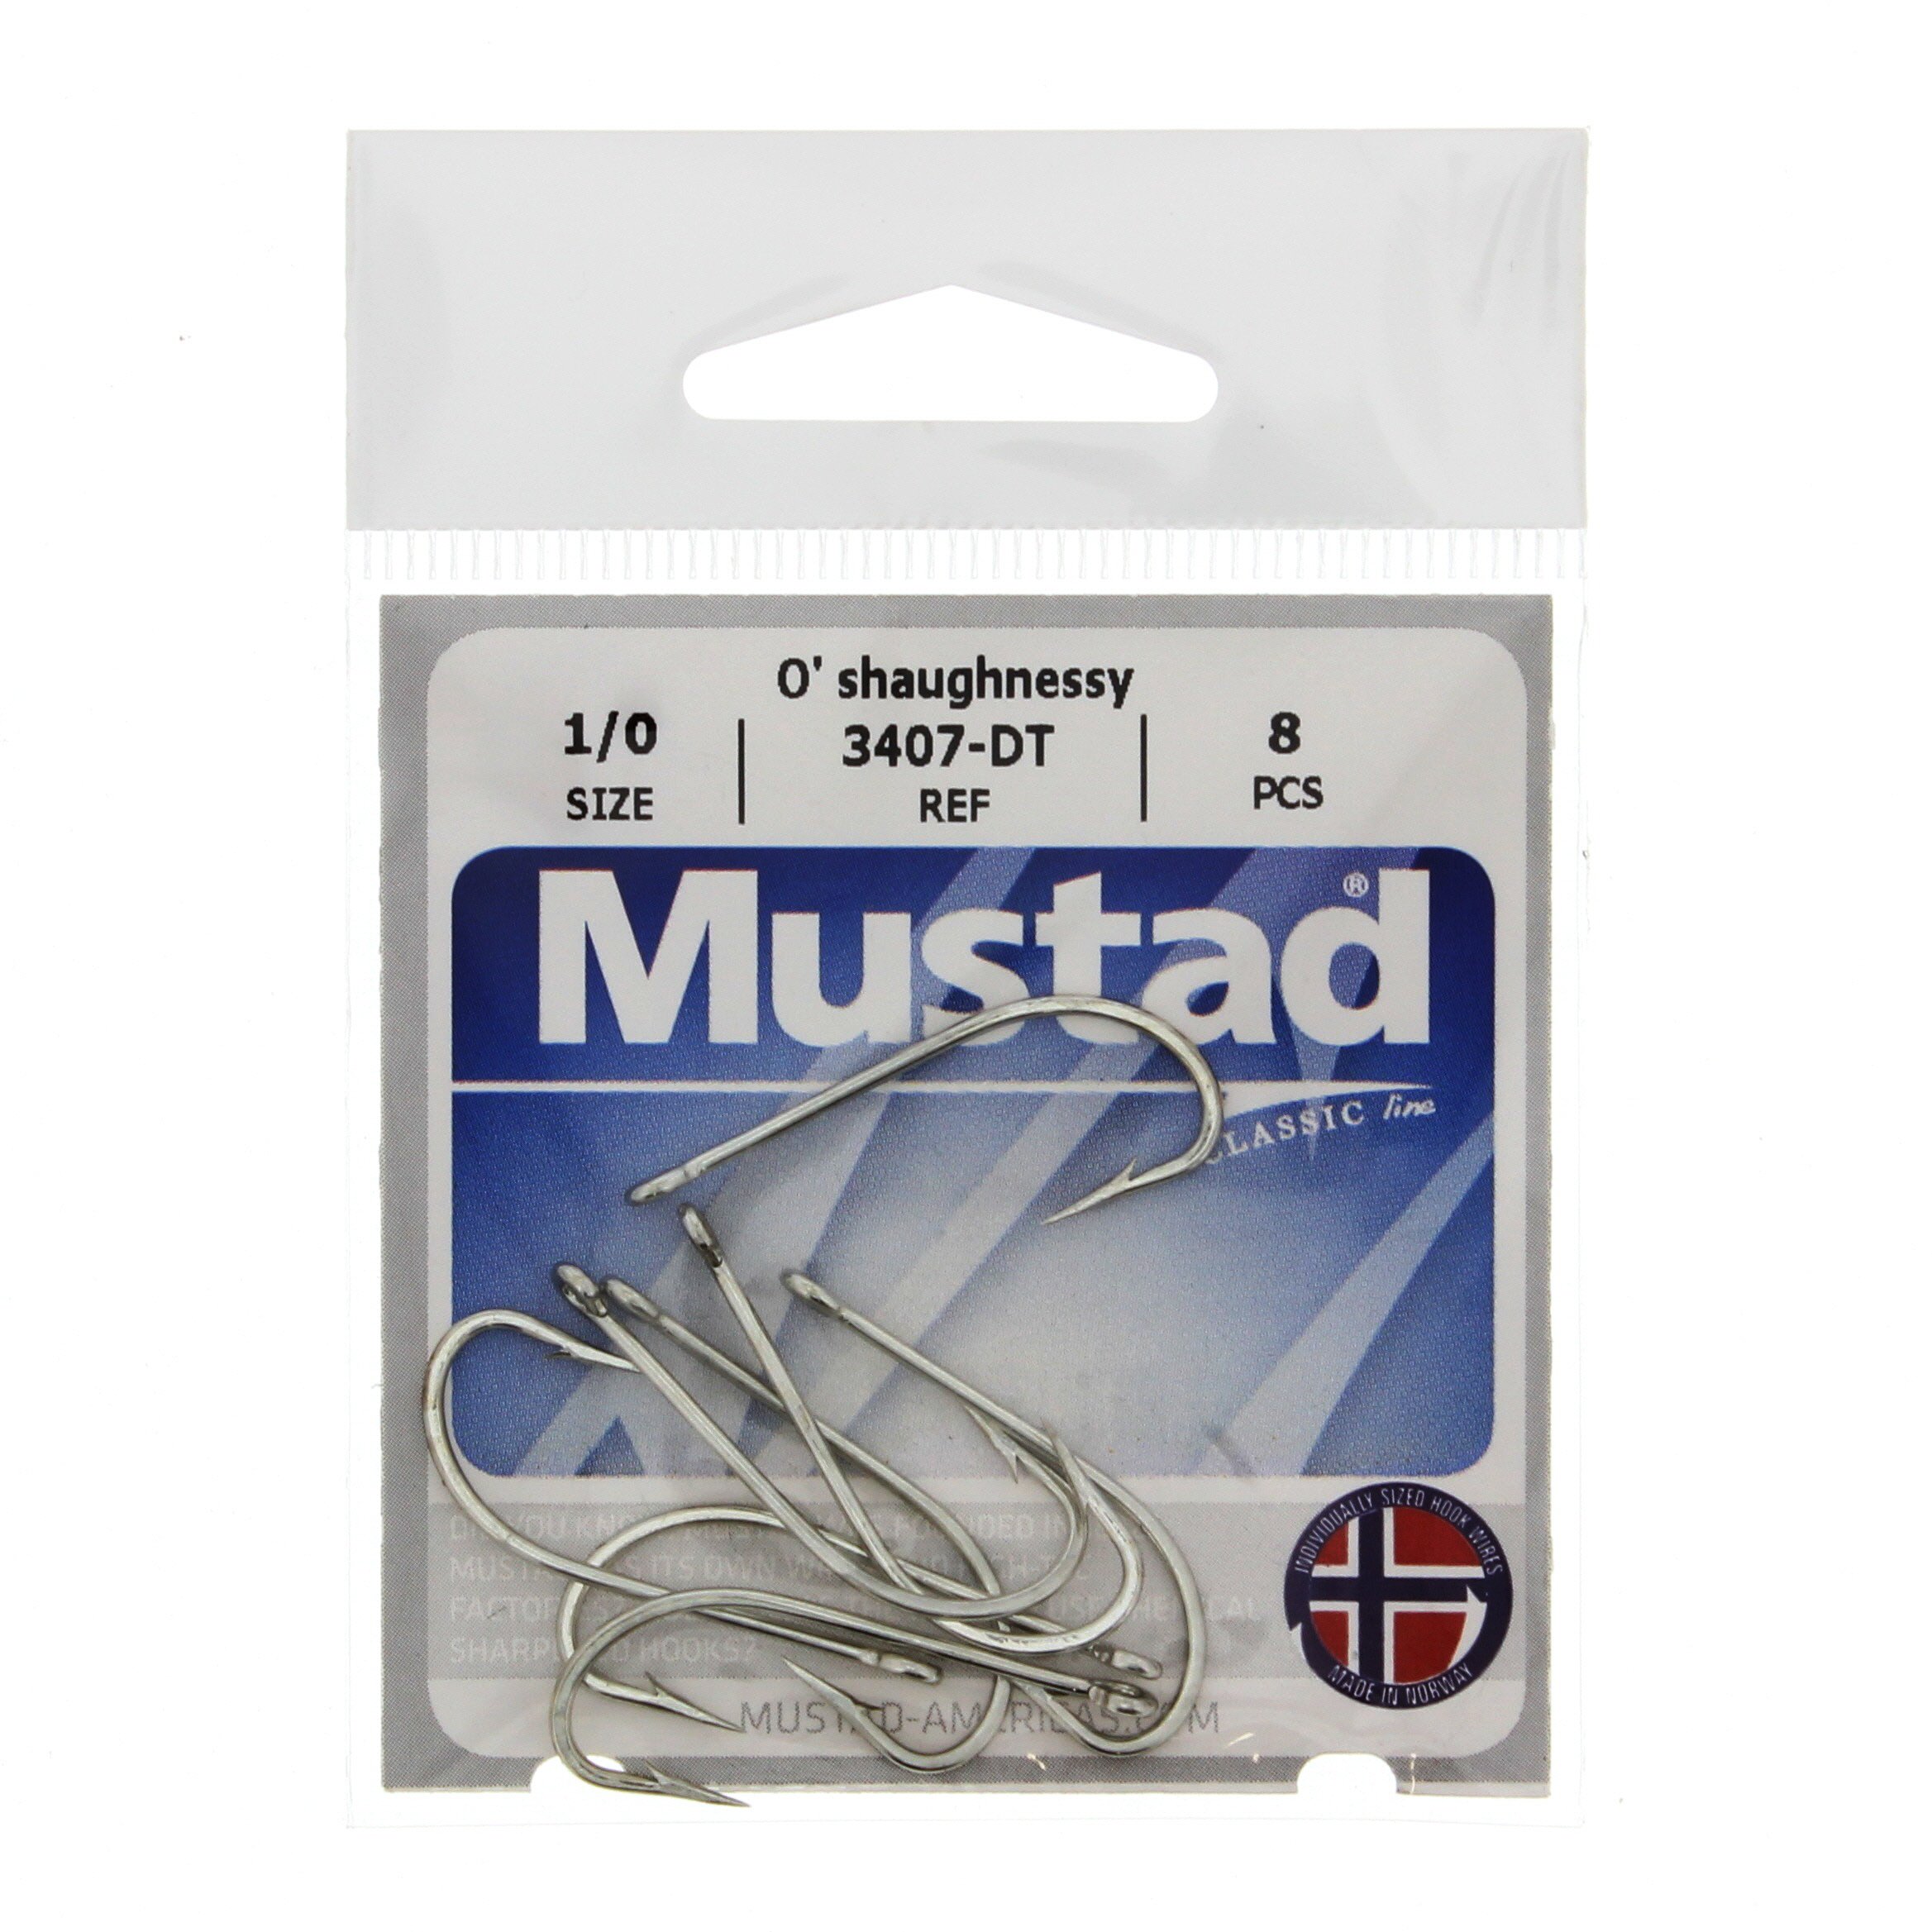 Mustad 3407-DT O'shaughnessy Hooks, Size 1/0 - Shop Fishing at H-E-B